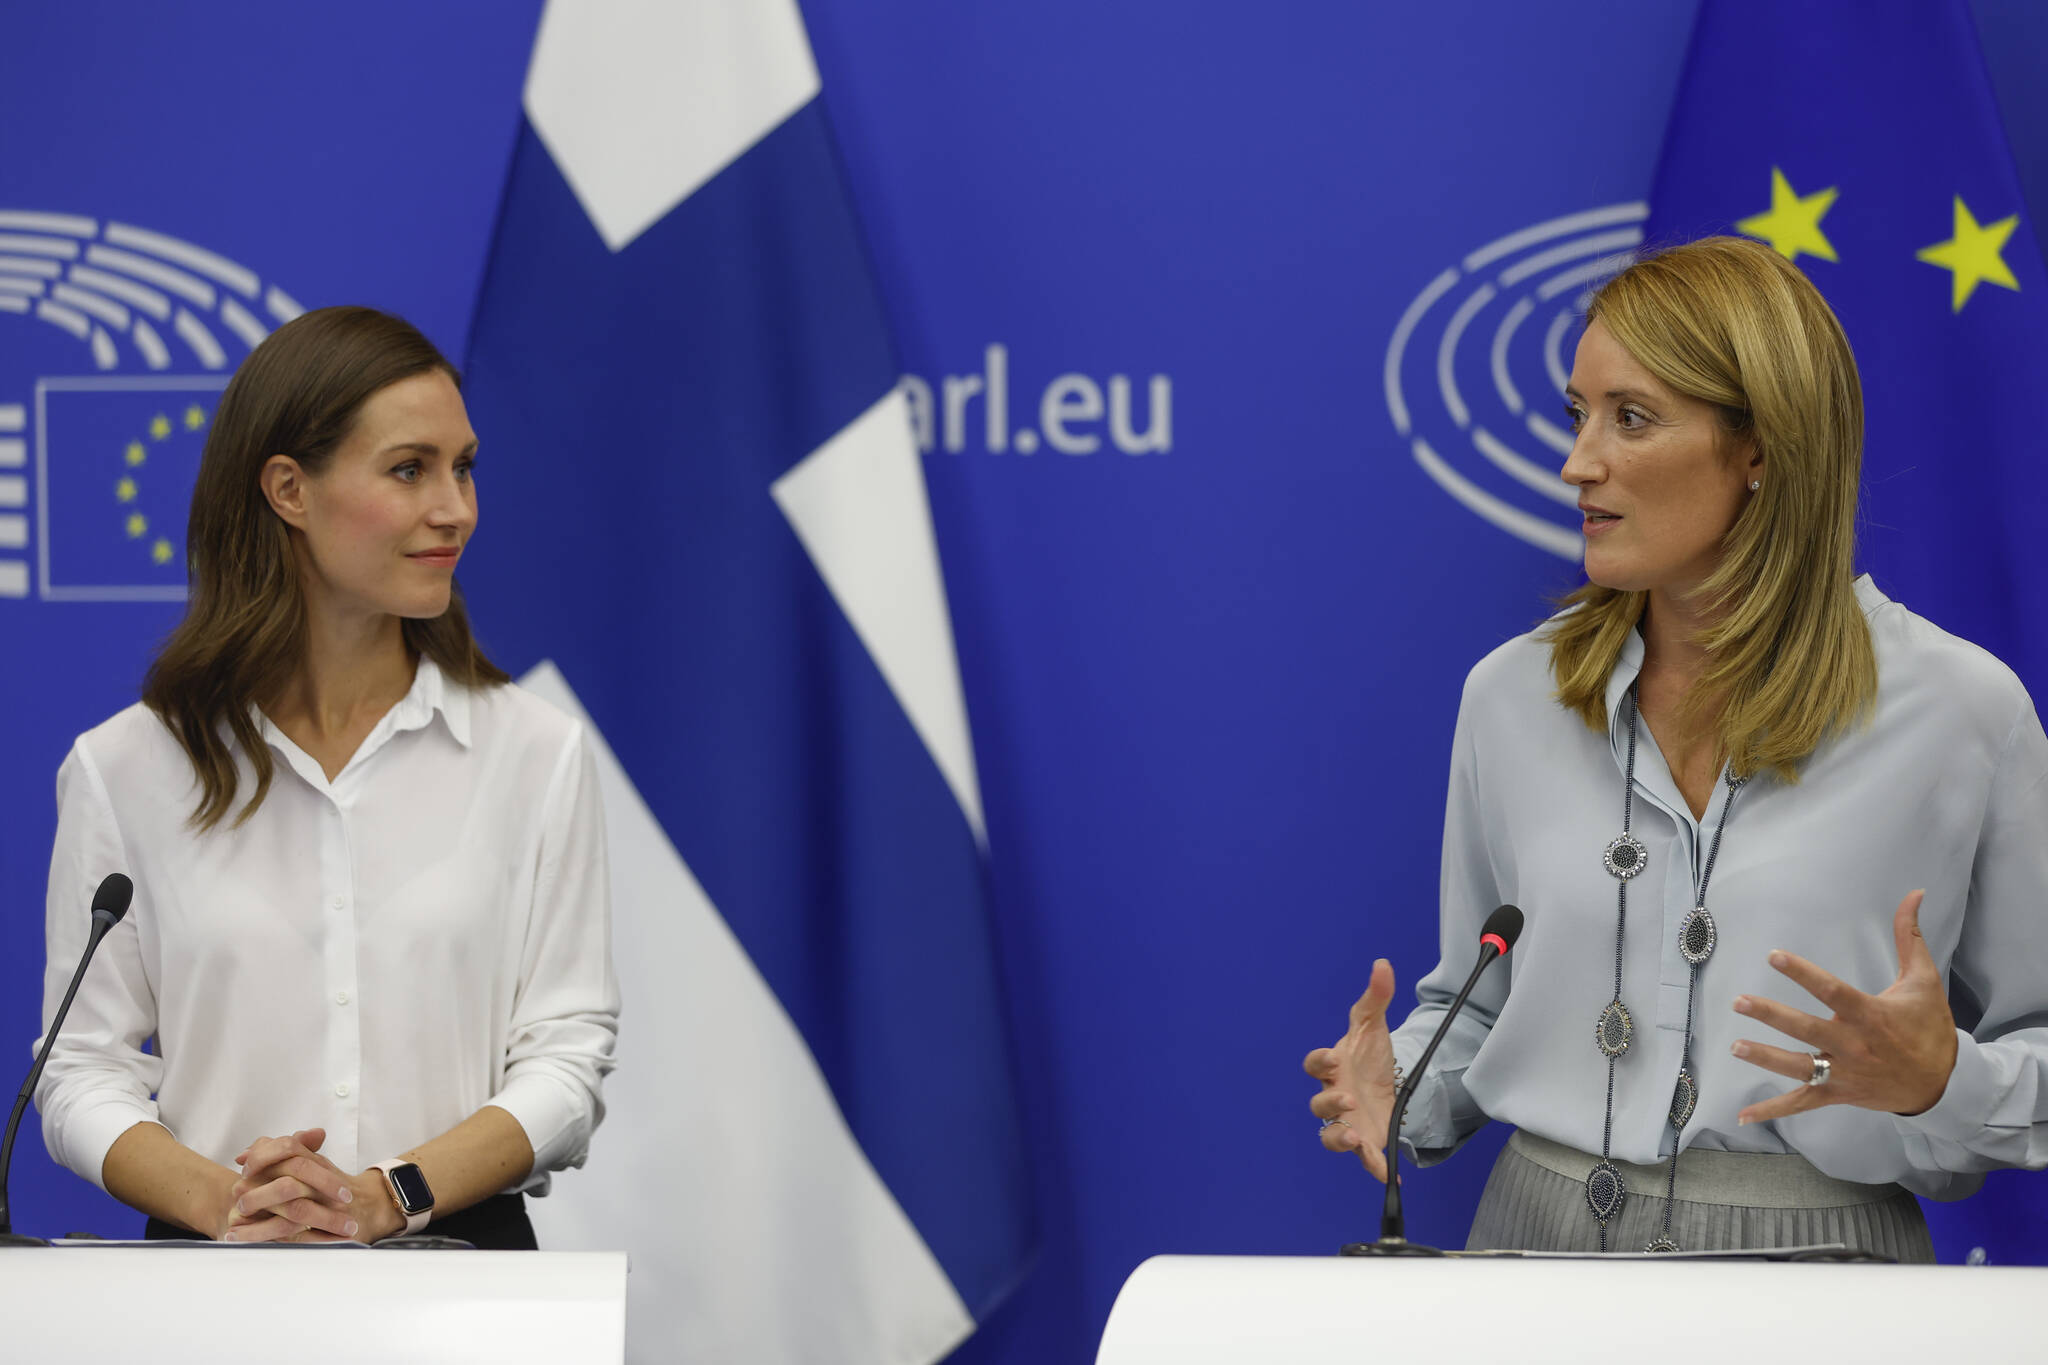 Finnish Prime Minister Sanna Marin, left, and European Parliament President Roberta Metsola attend a media conference at the European Parliament in Strasbourg, eastern France, Tuesday, Sept. 13, 2022. (AP Photo/Jean-Francois Badias)